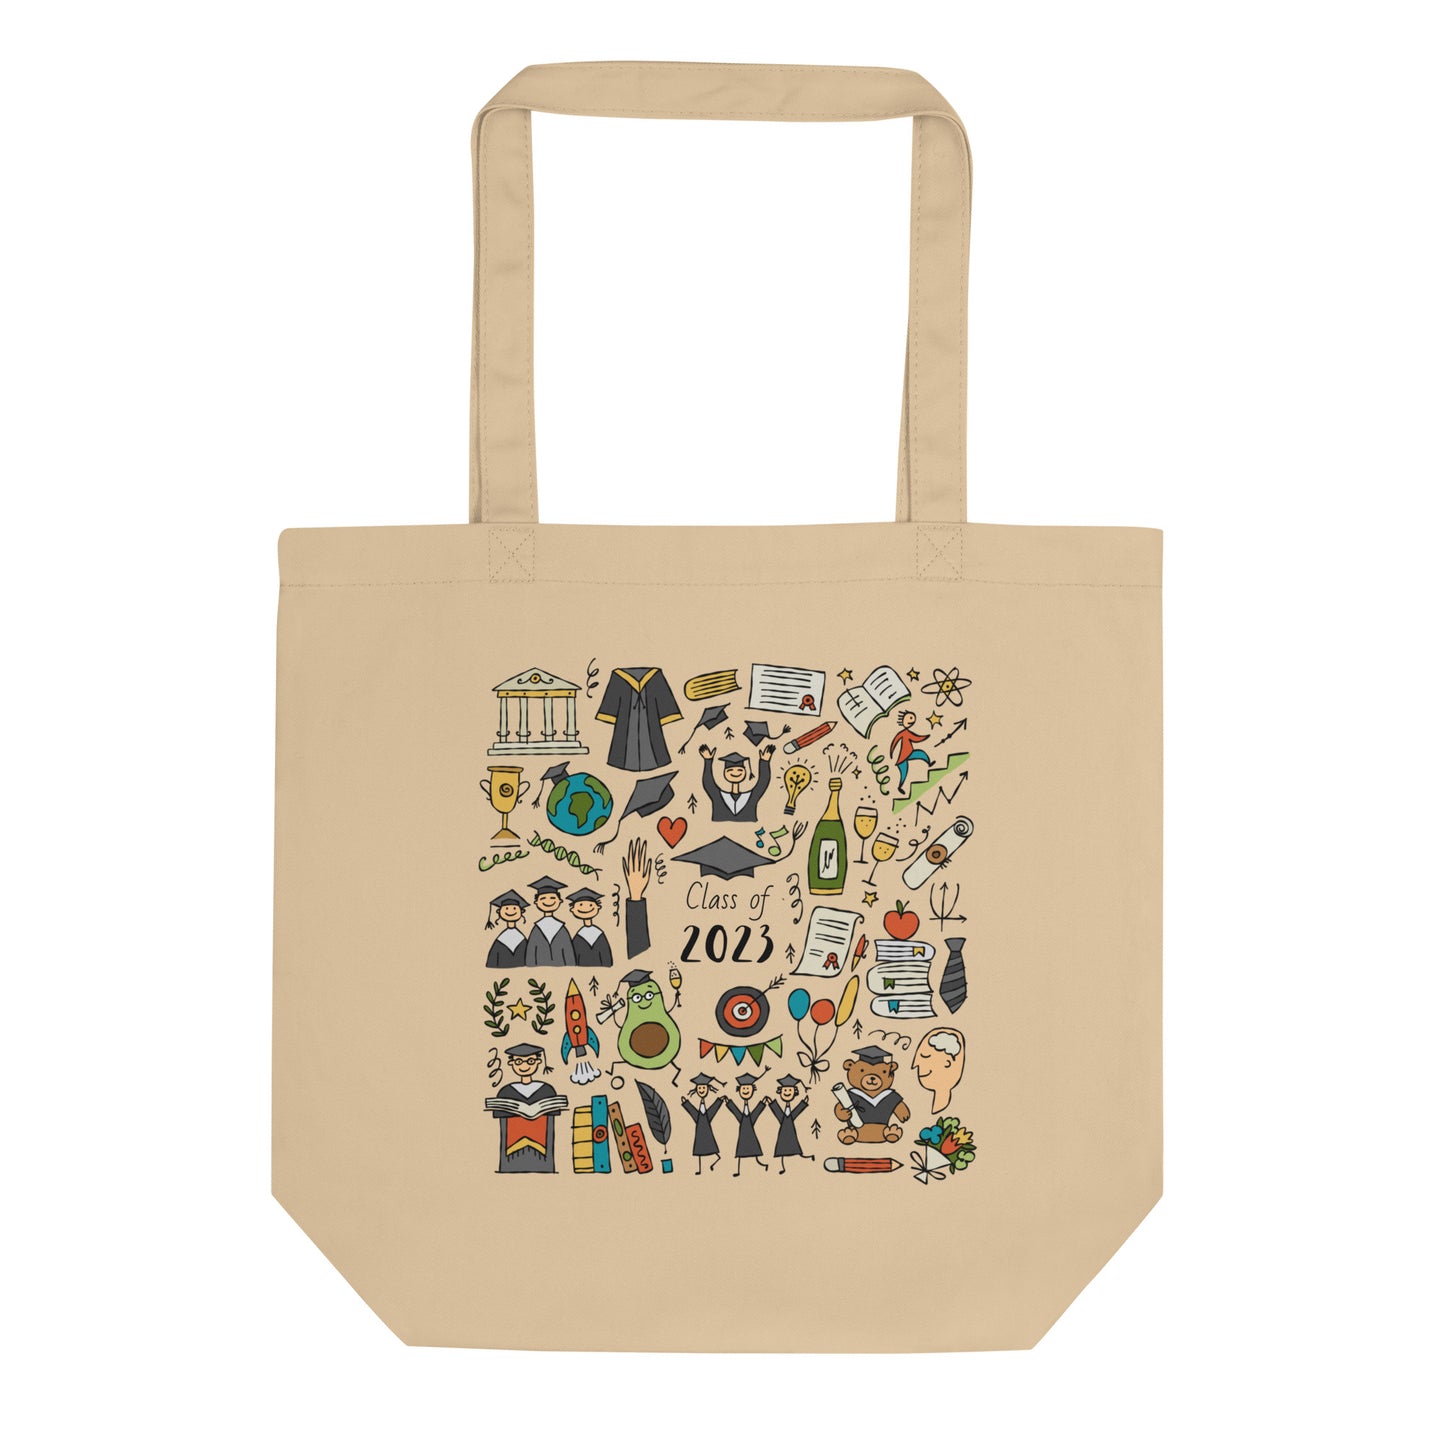 Eco tote bag for Graduation. Funny designer print. Free personalised option with custom text